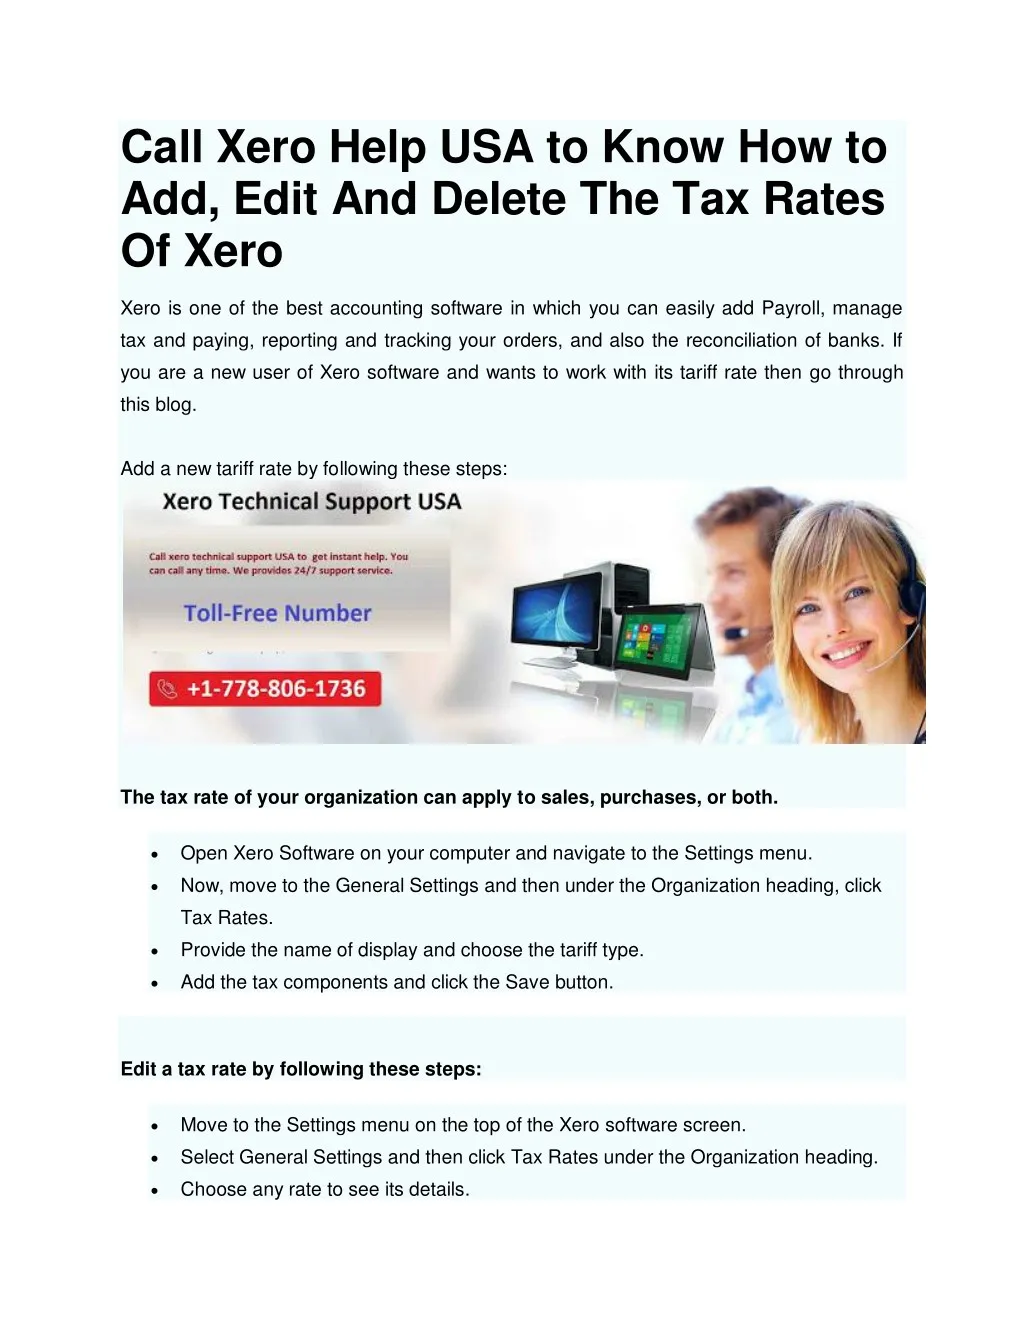 call xero help usa to know how to add edit